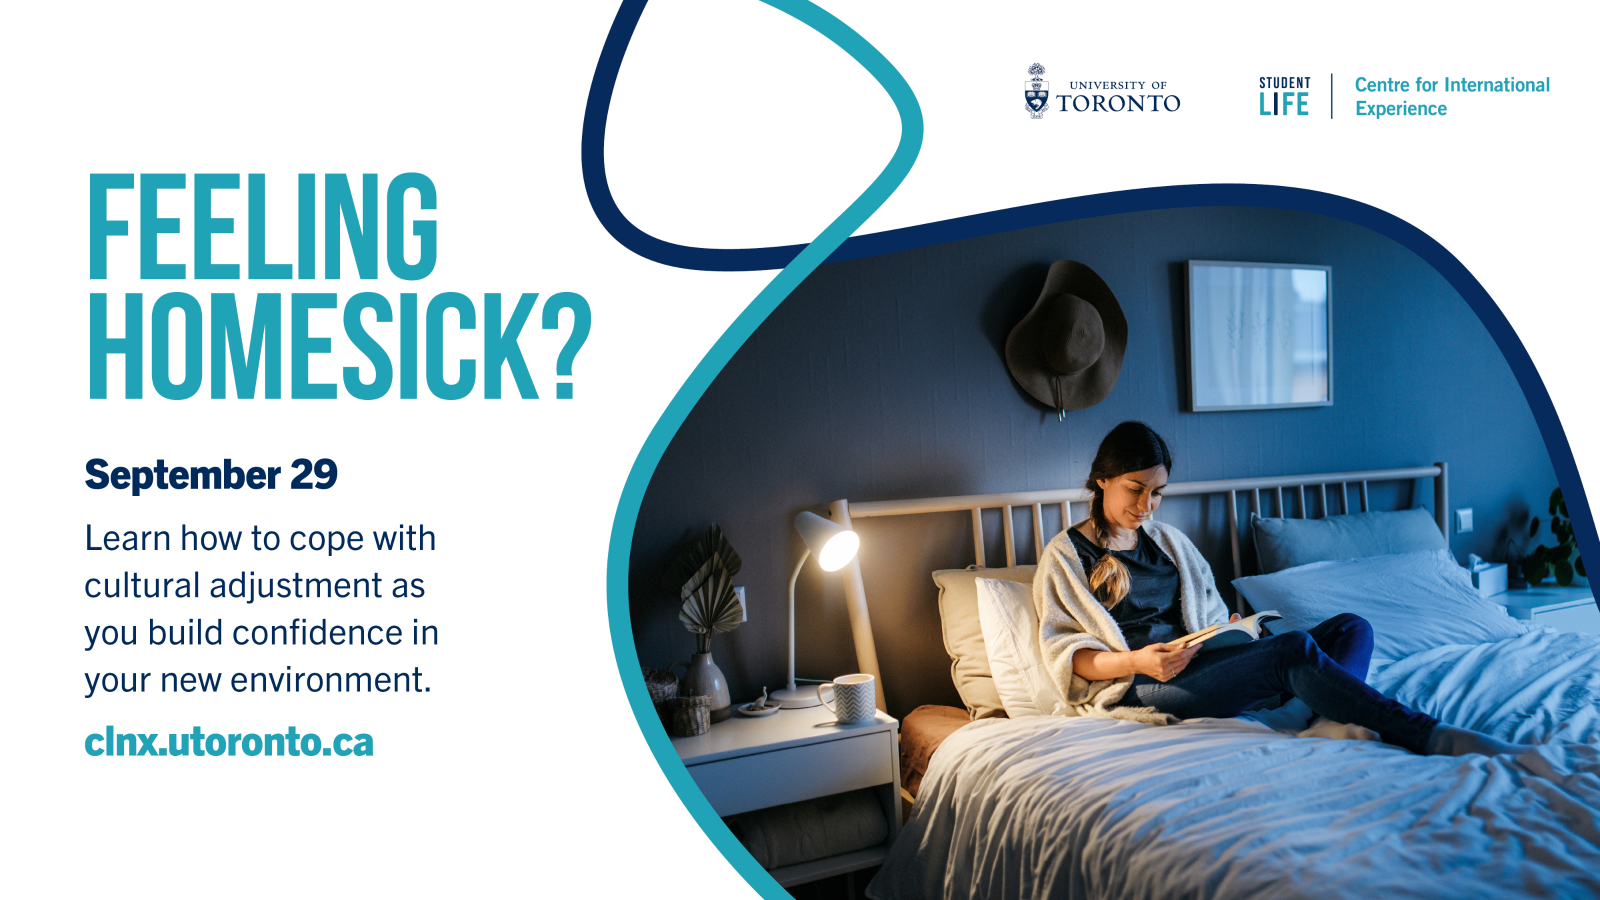 A photo of a person sitting on the bed reading with the reading lamp, with text " Feeling Homesick? September 29. Learn how to cope with cultural adjustment as you build confidence in your new environment. clnx.utoronto.ca".